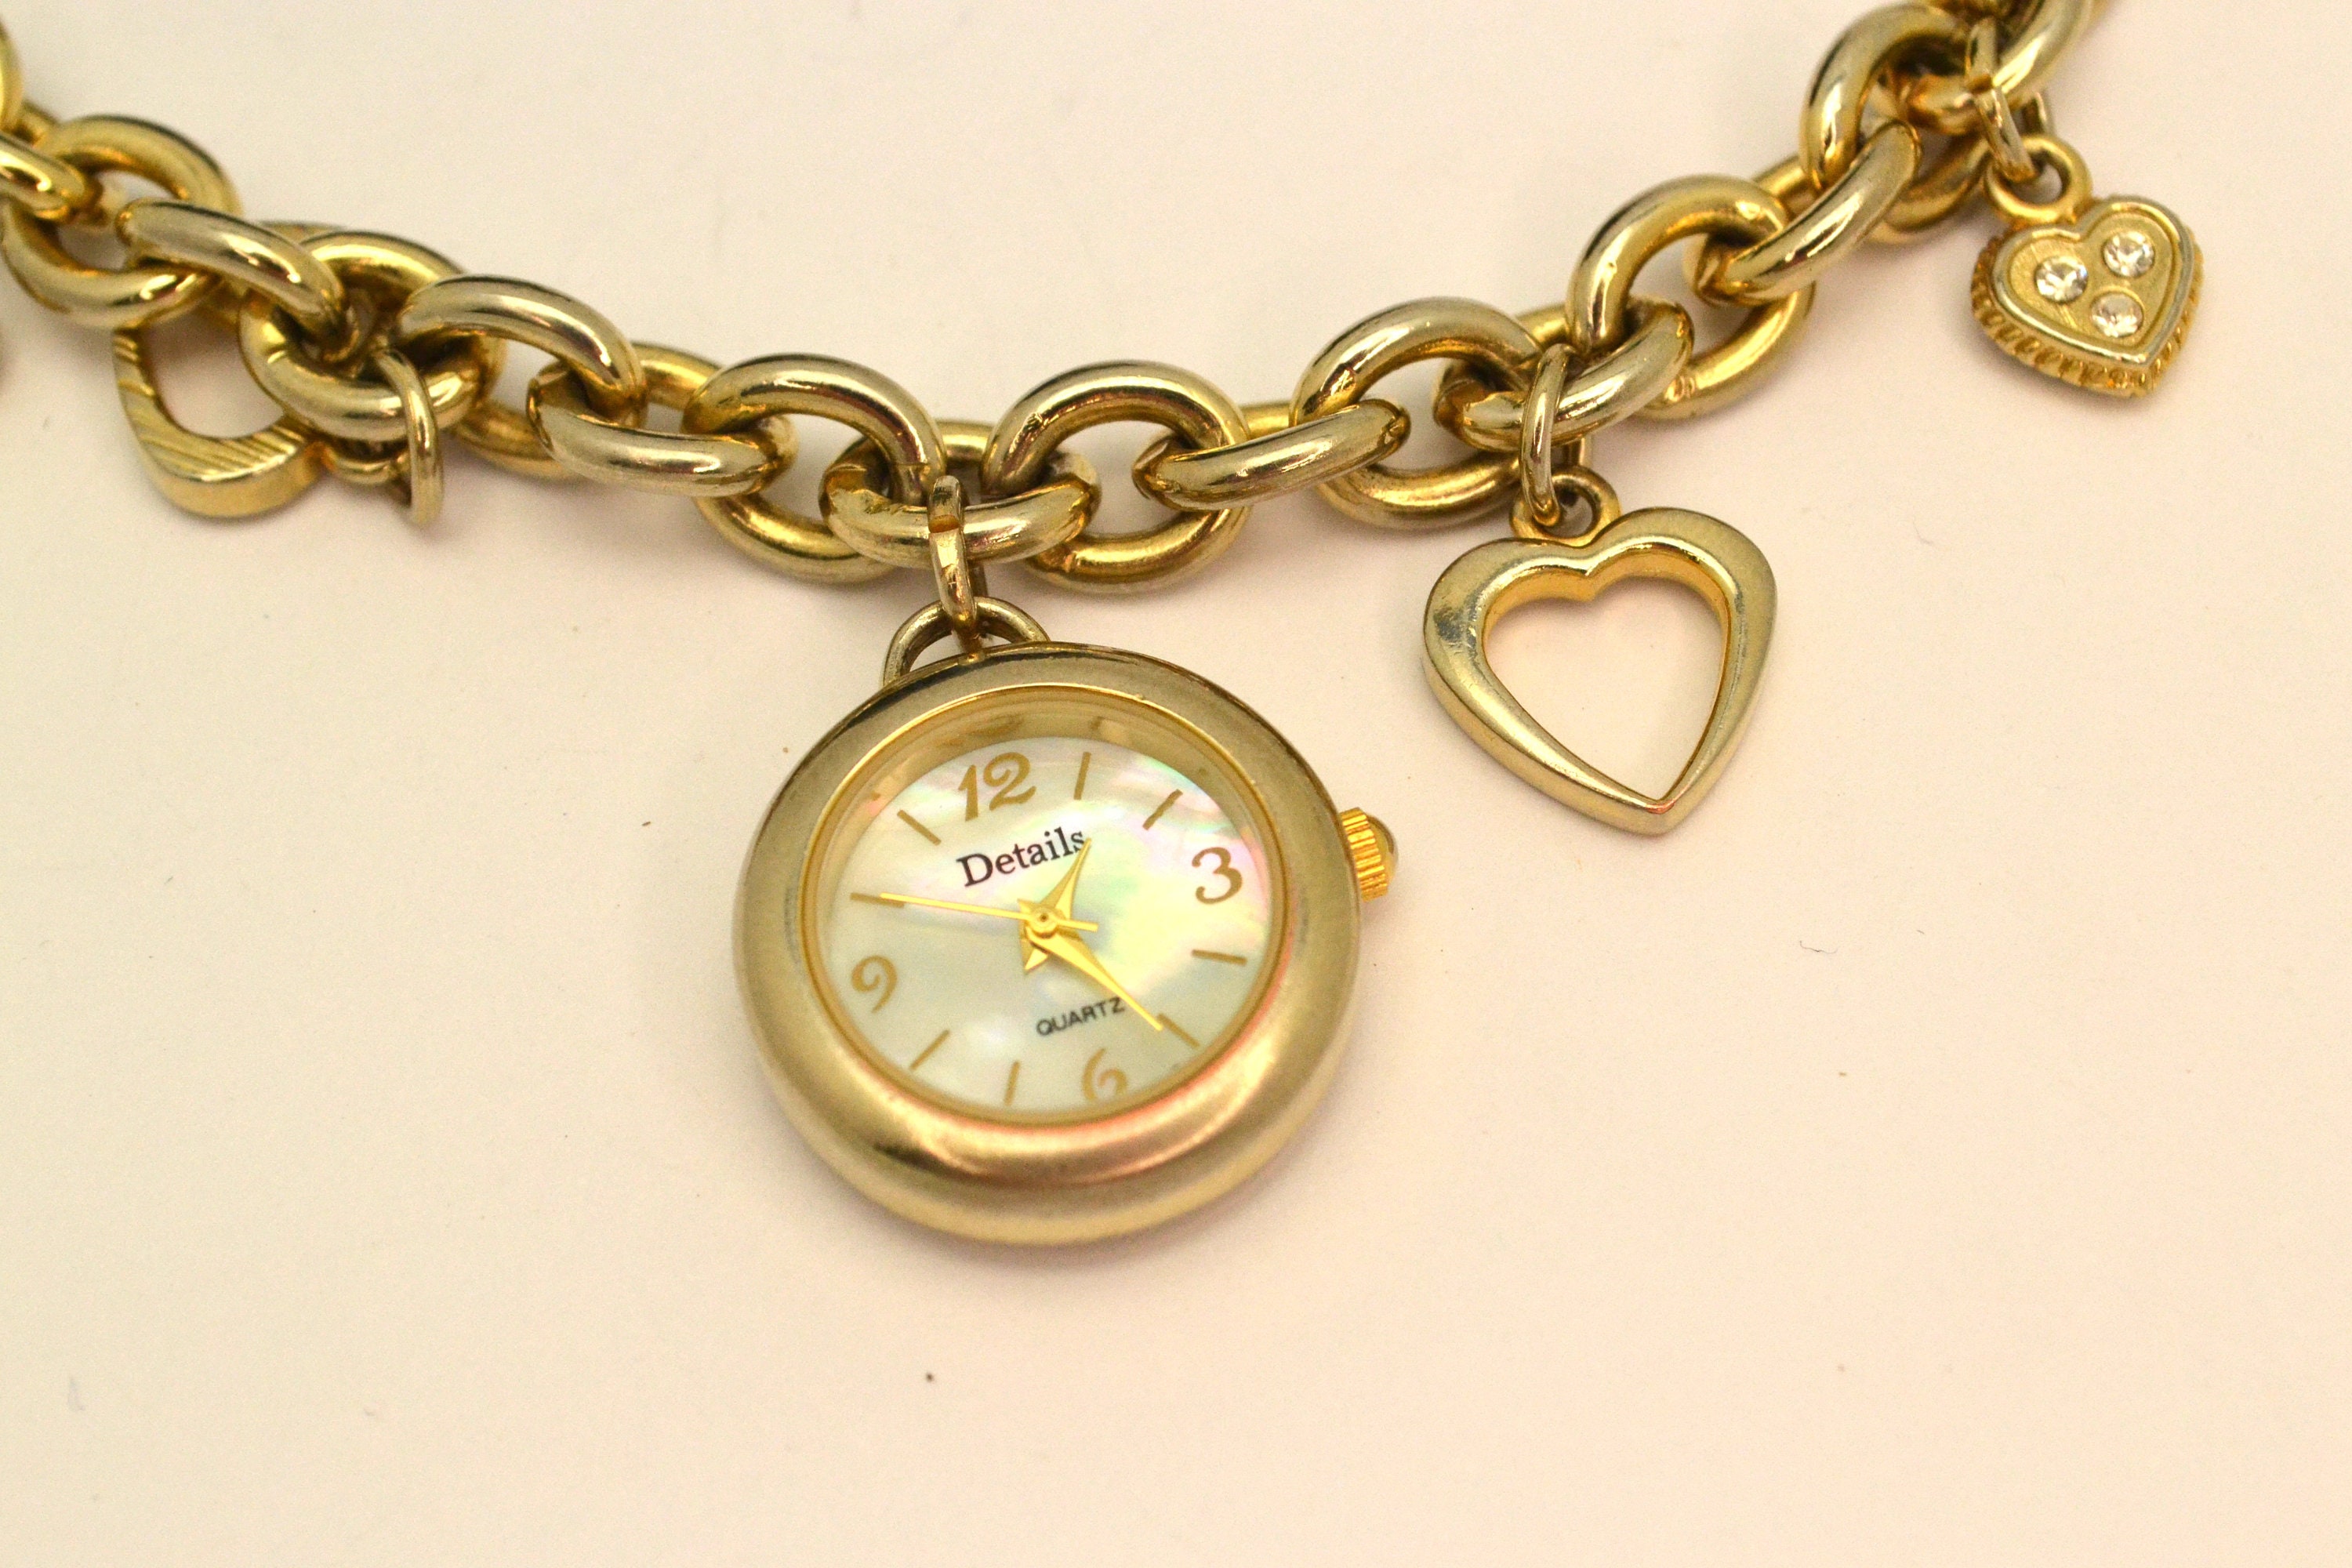 Vintage Watch Charm Bracelet Gold Tone Metal Details Quartz Watch With  Hearts Made in China Unique Gift for Her - Etsy India